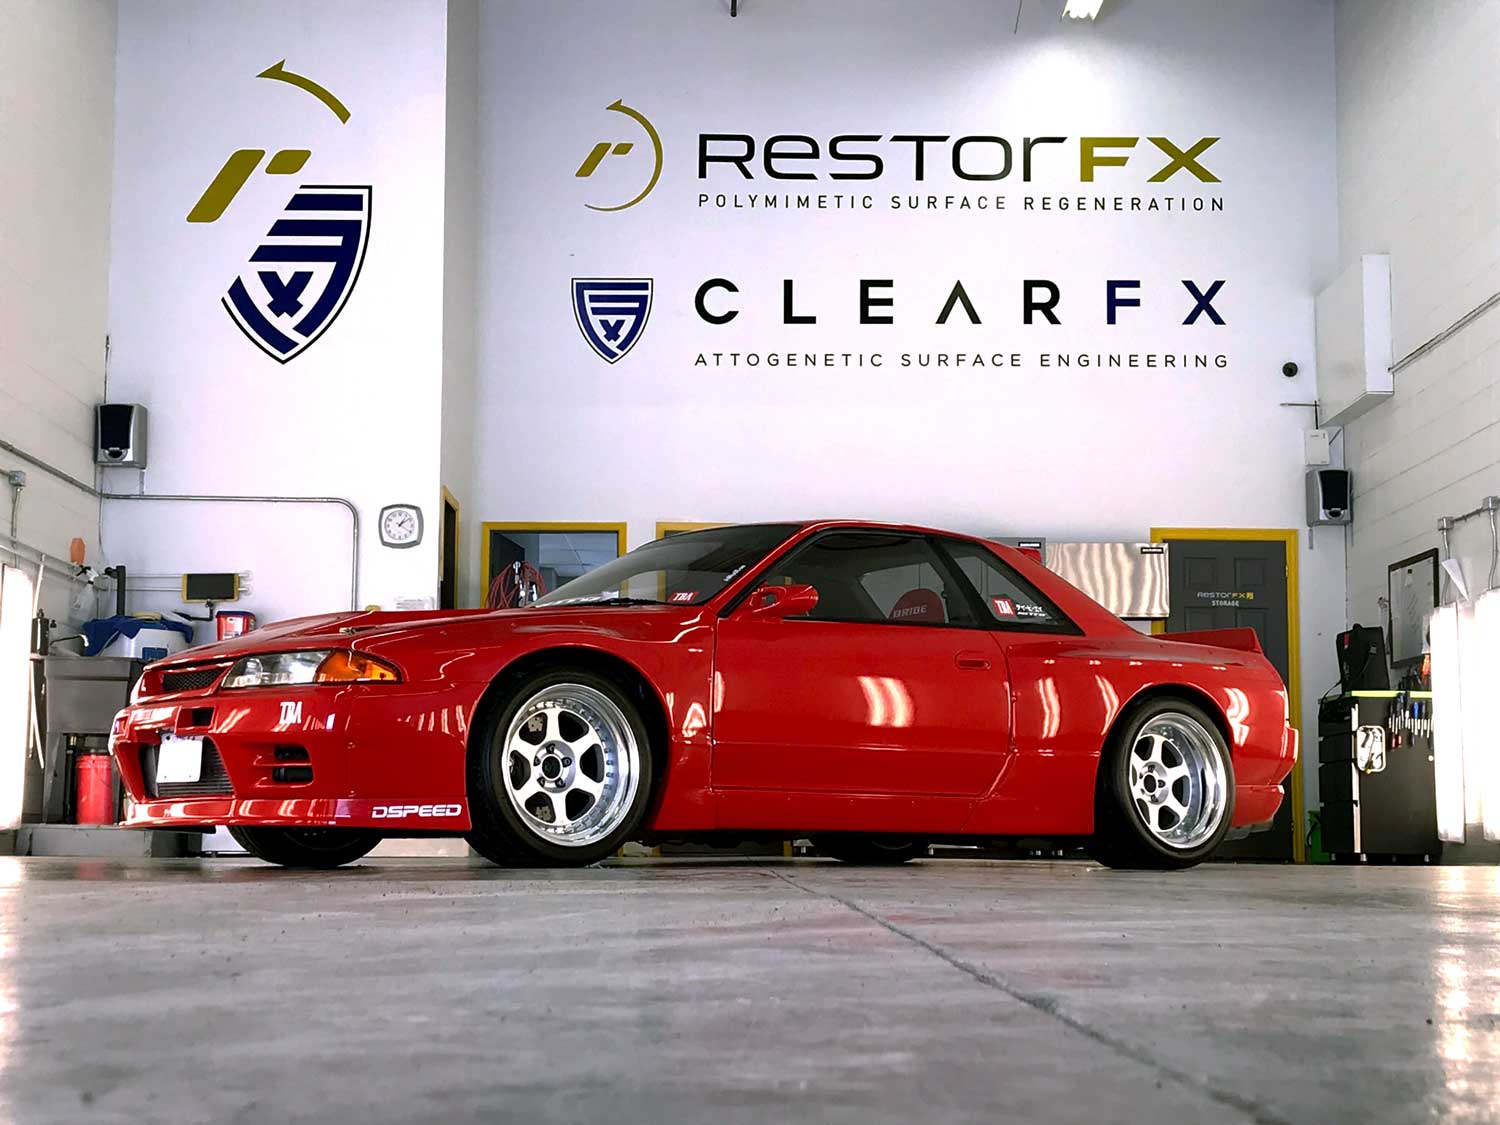 RestorFX GTA shop area with a bright red sports car inside the brightly lit facility with tall ceilings